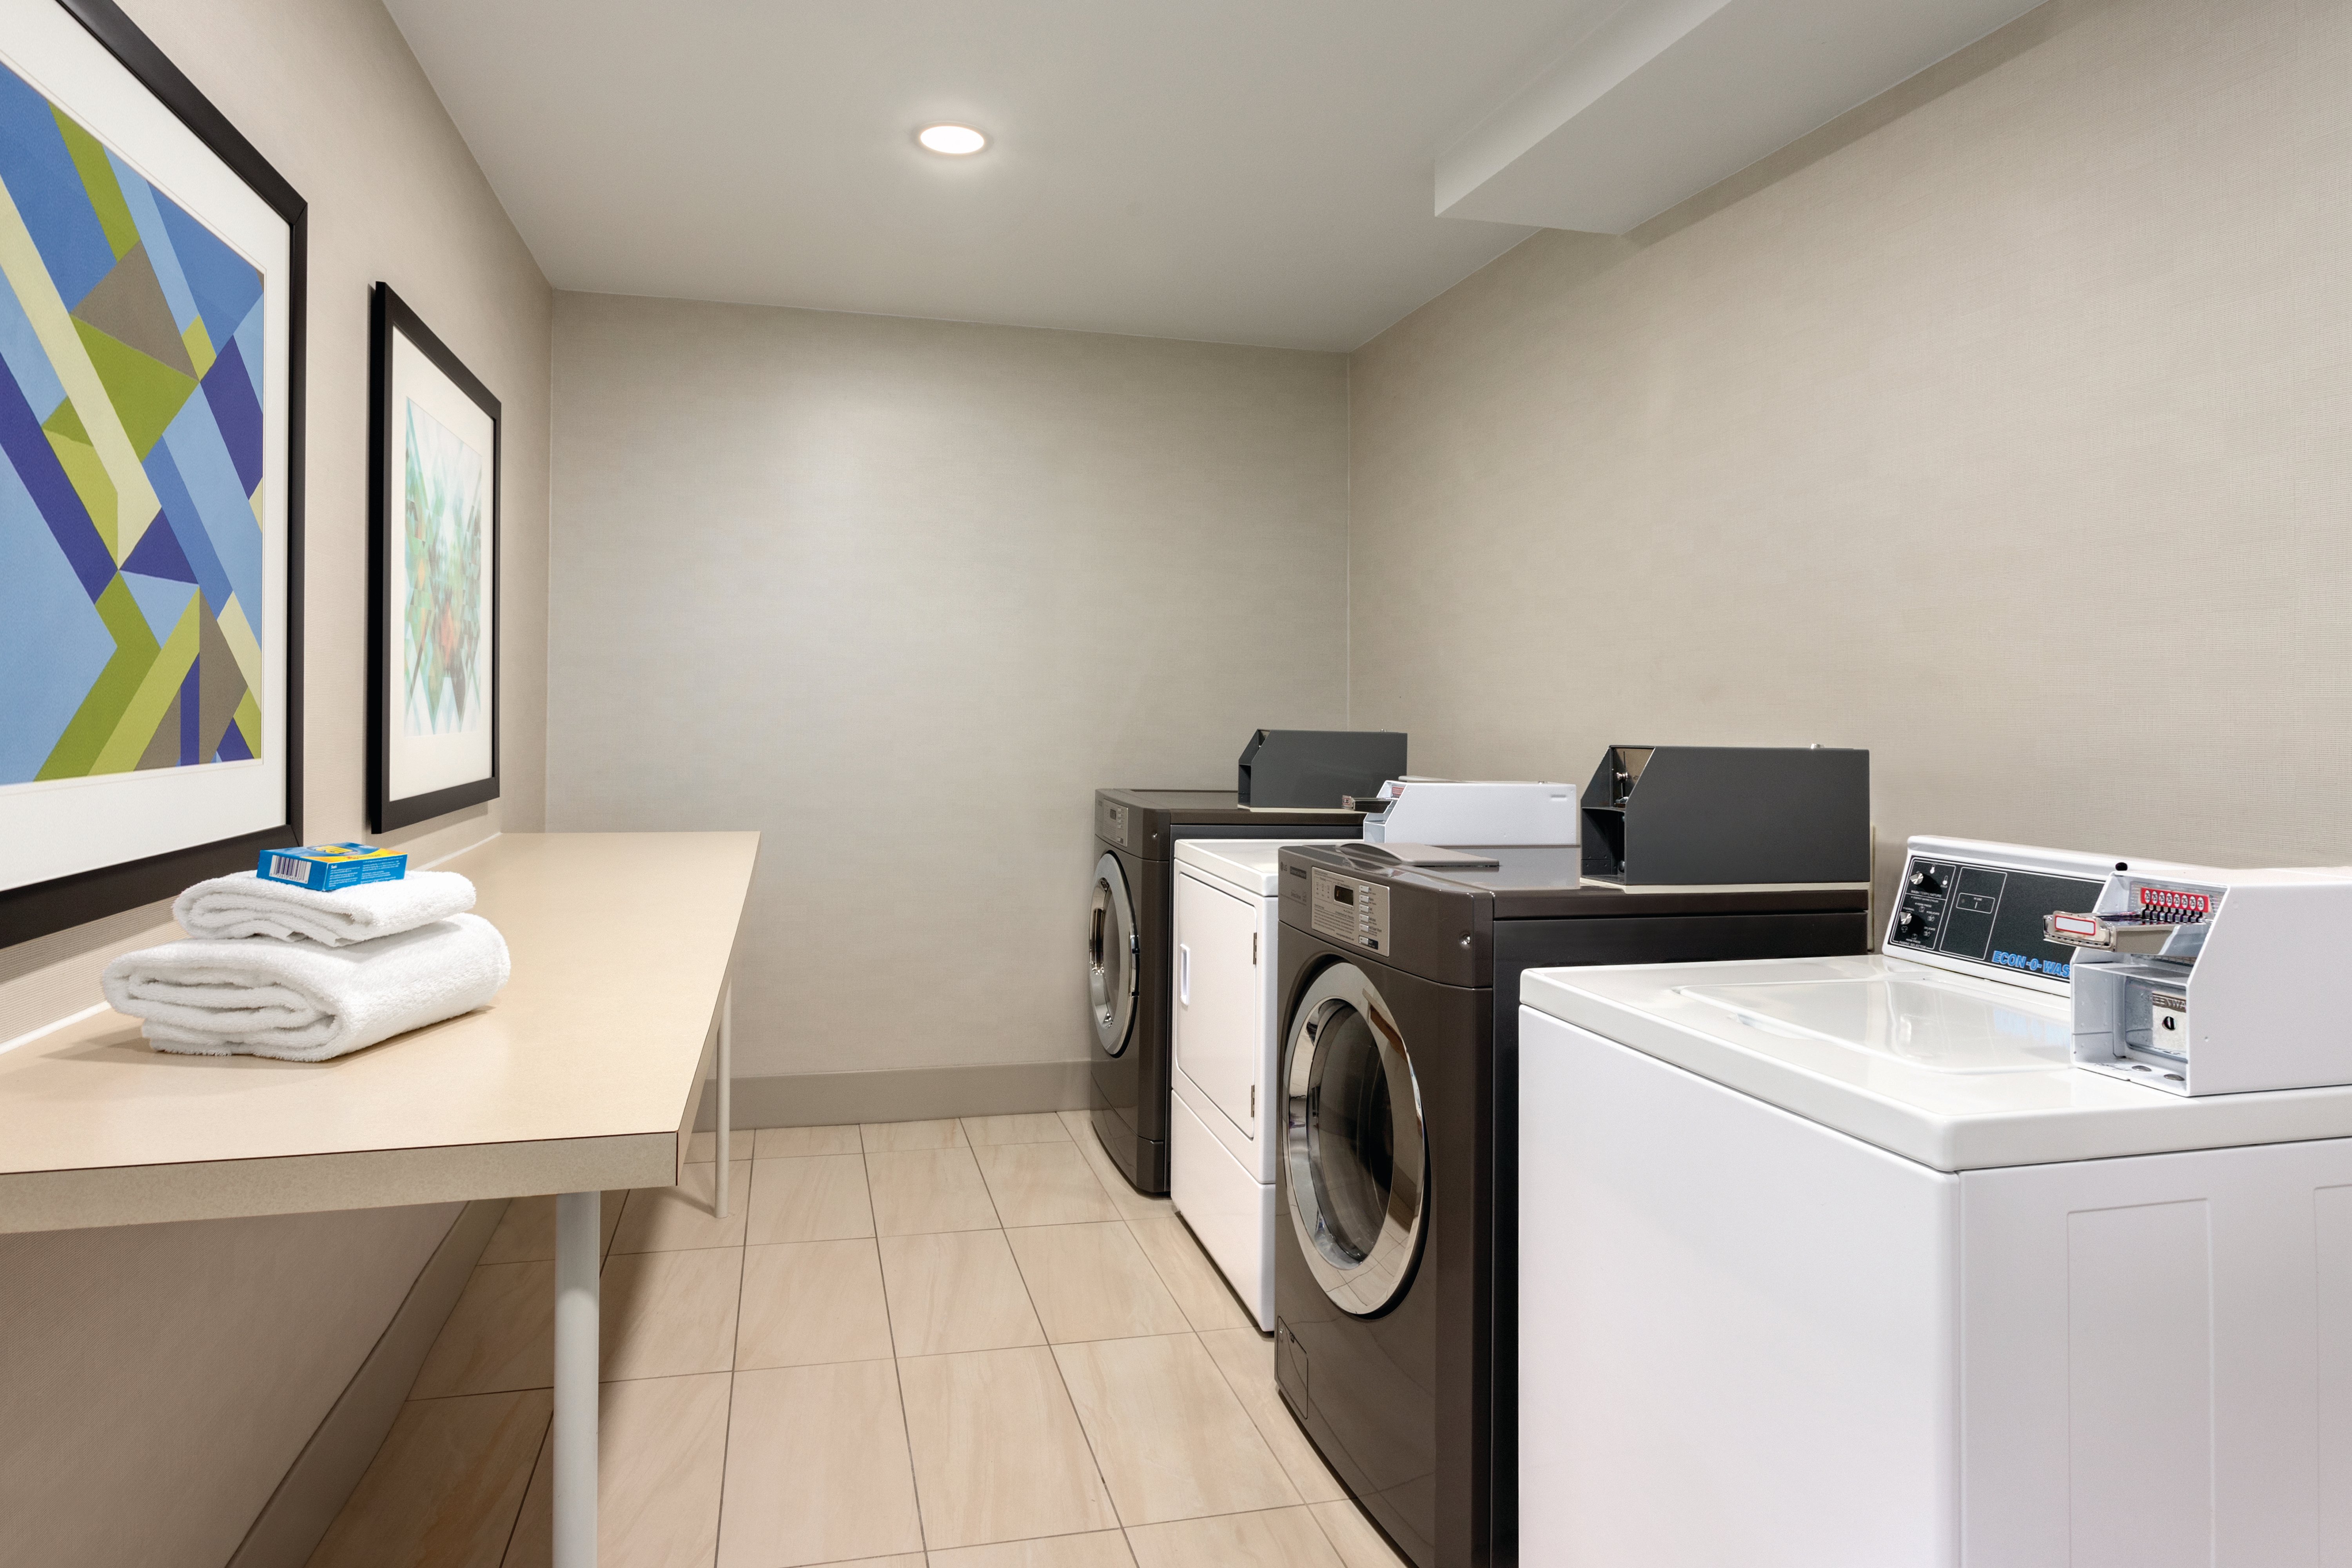 Laundry service is available 24/7 for guests convenience